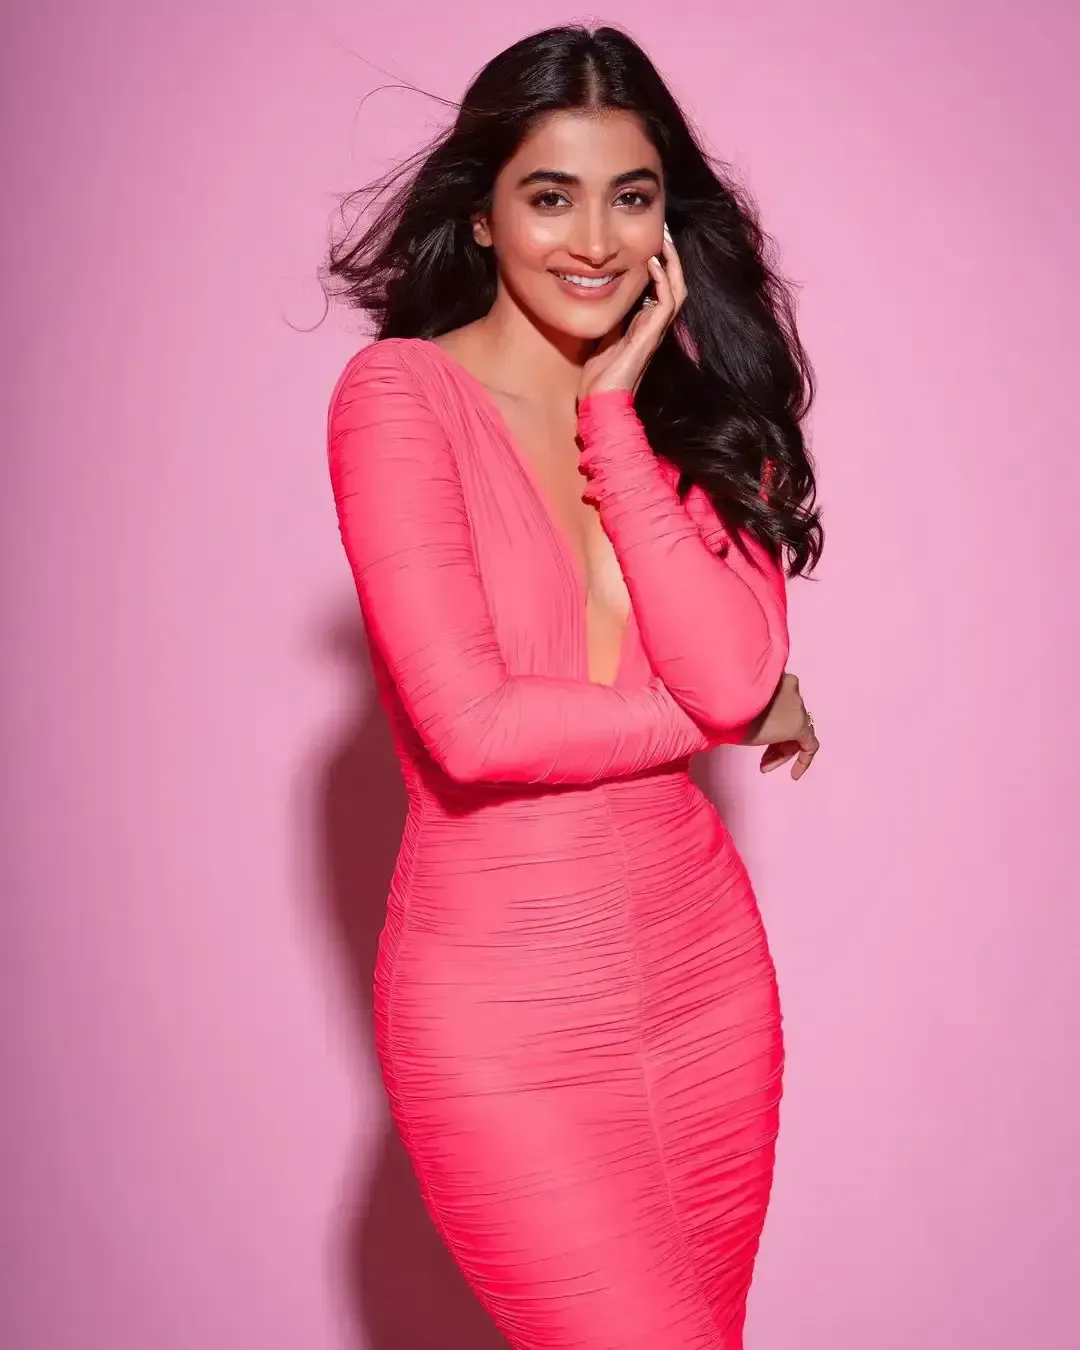 BOLLYWOOD ACTRESS POOJA HEGDE IMAGES IN PINK DRESS 1